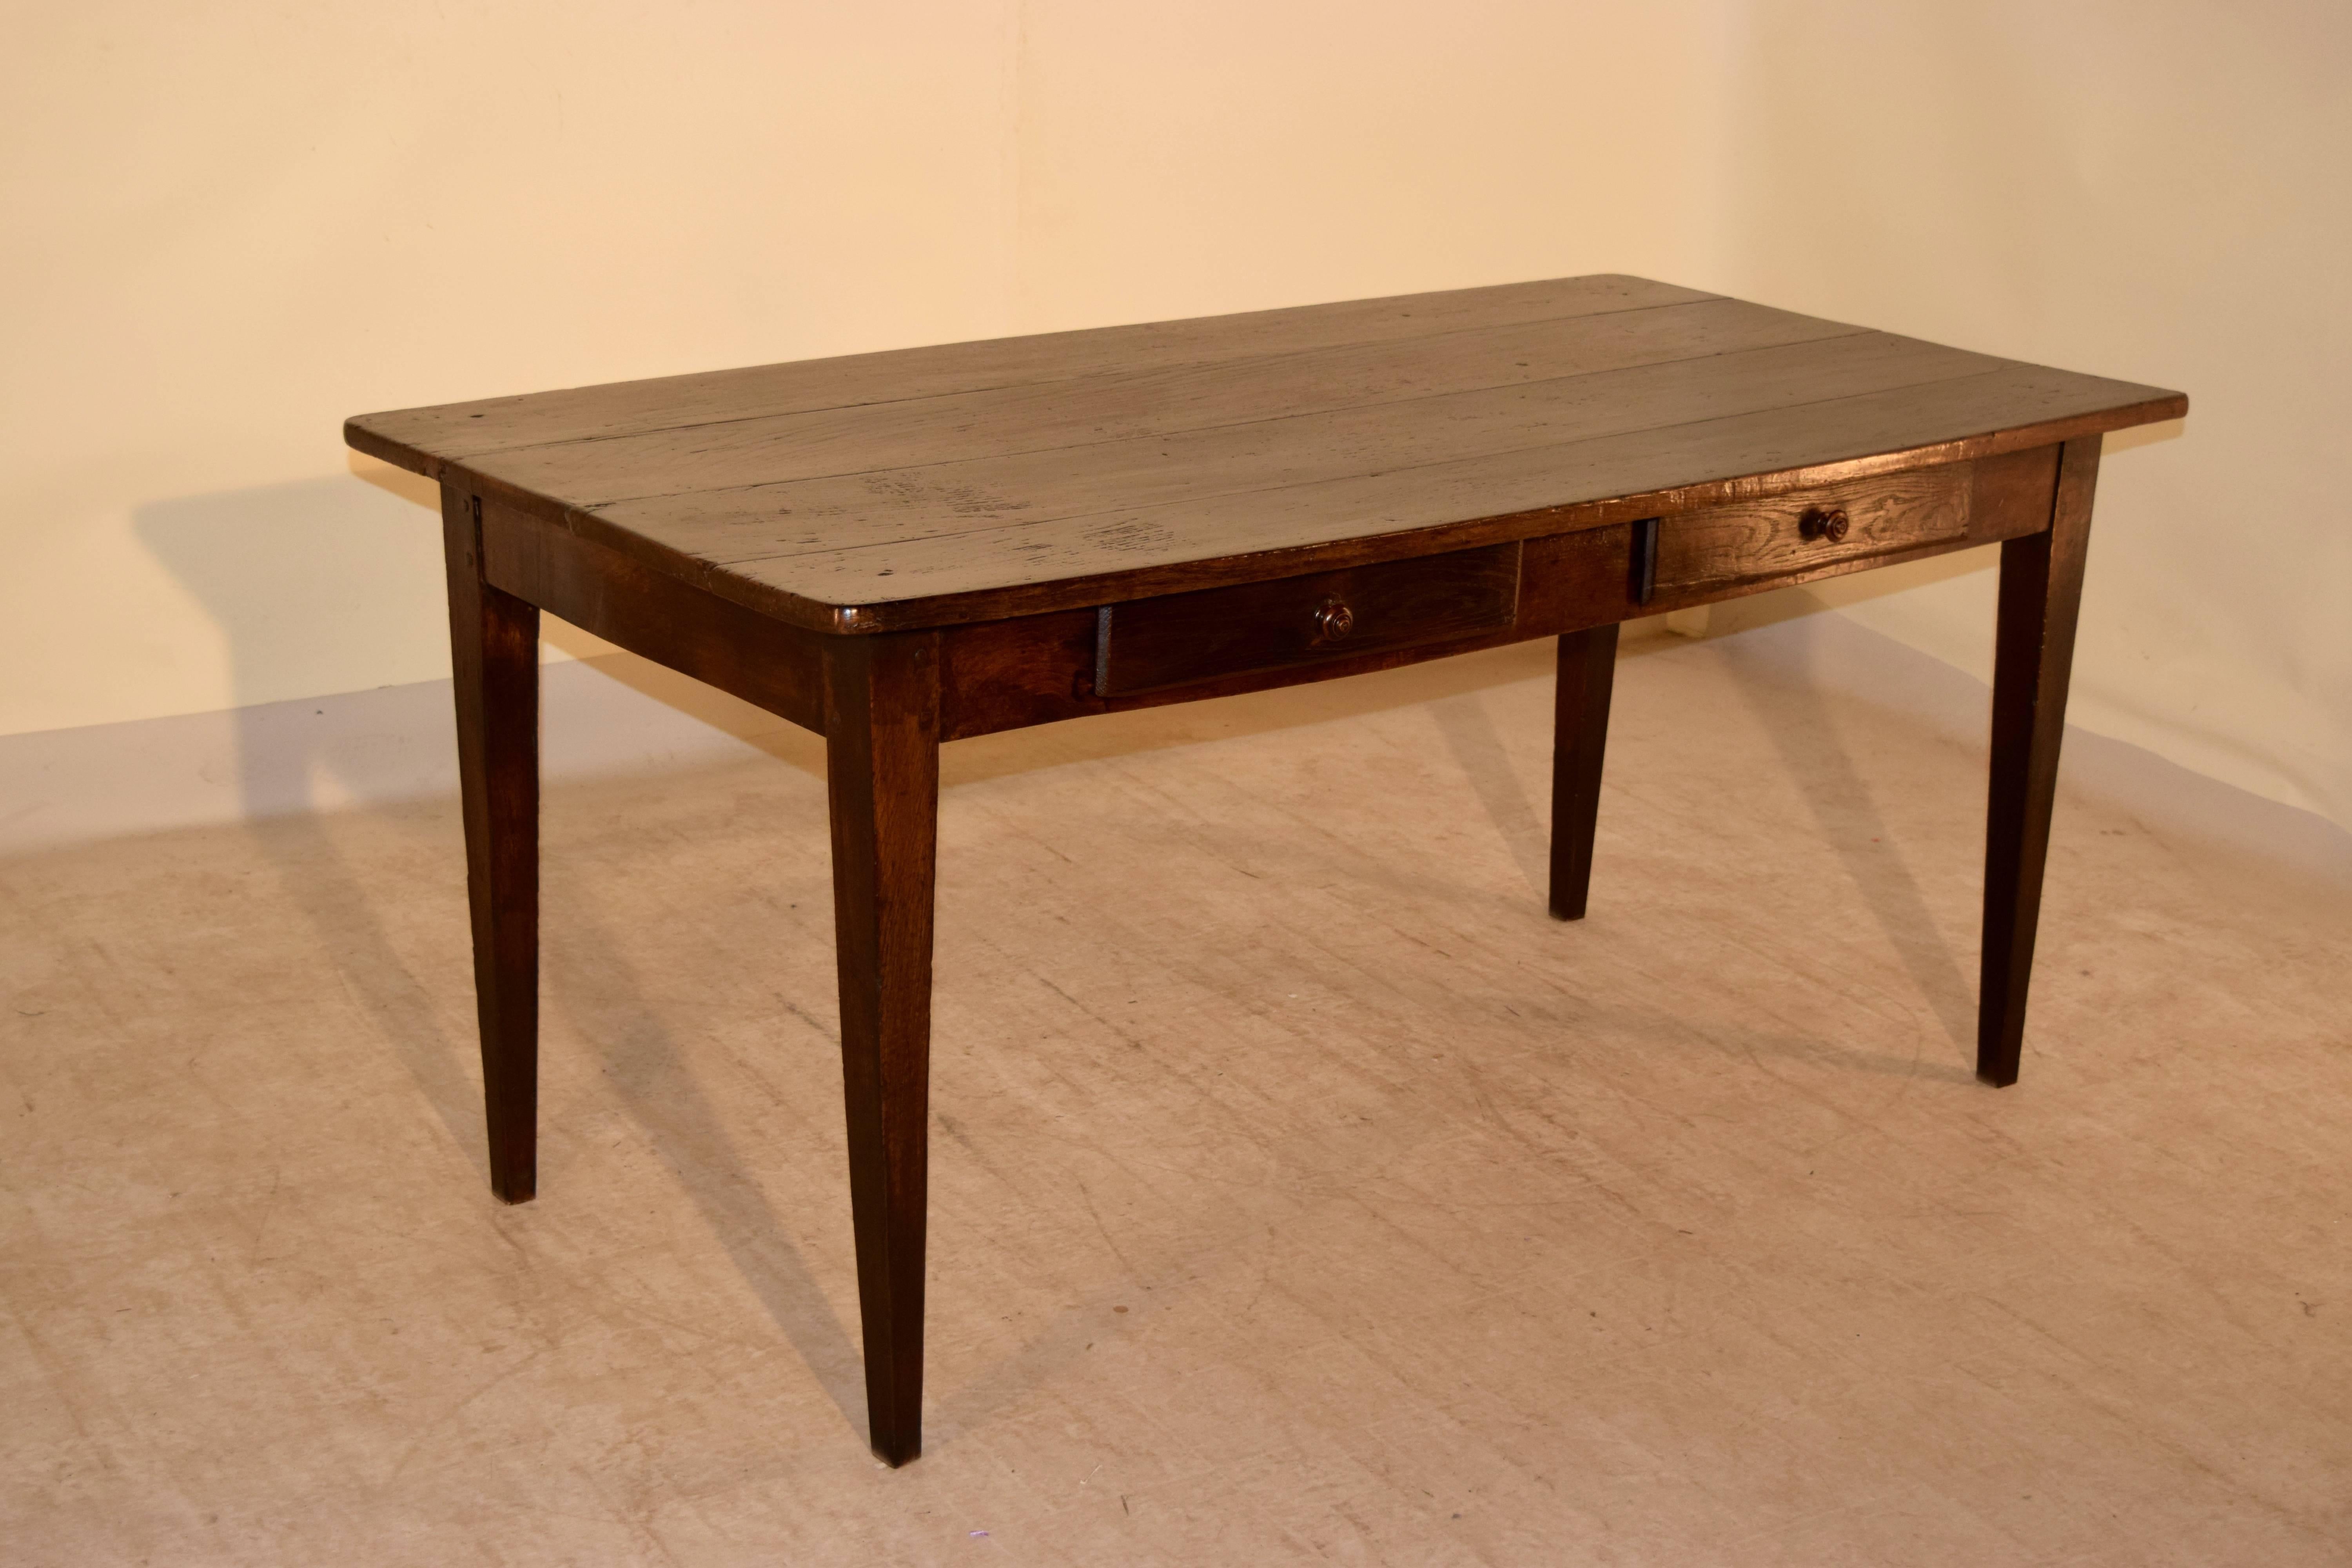 Early 19th century French farm table made from Chestnut. It has a four plank top and a simple apron with two drawers following down to simple tapered legs. The apron measures 24.88